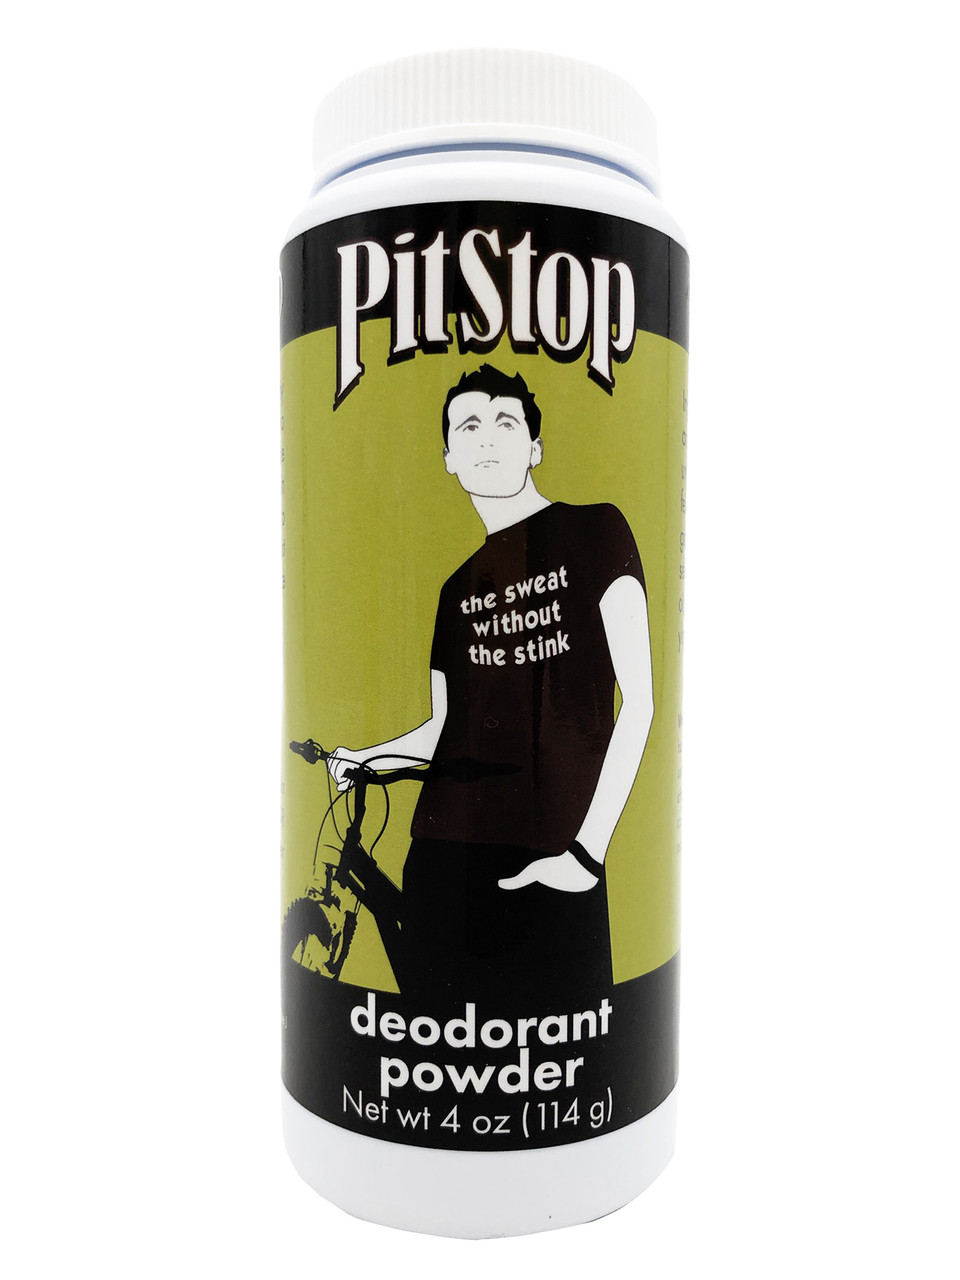 Pit Stop Deodorant For by Muddy H2O Etc oz - Good-Earth Store